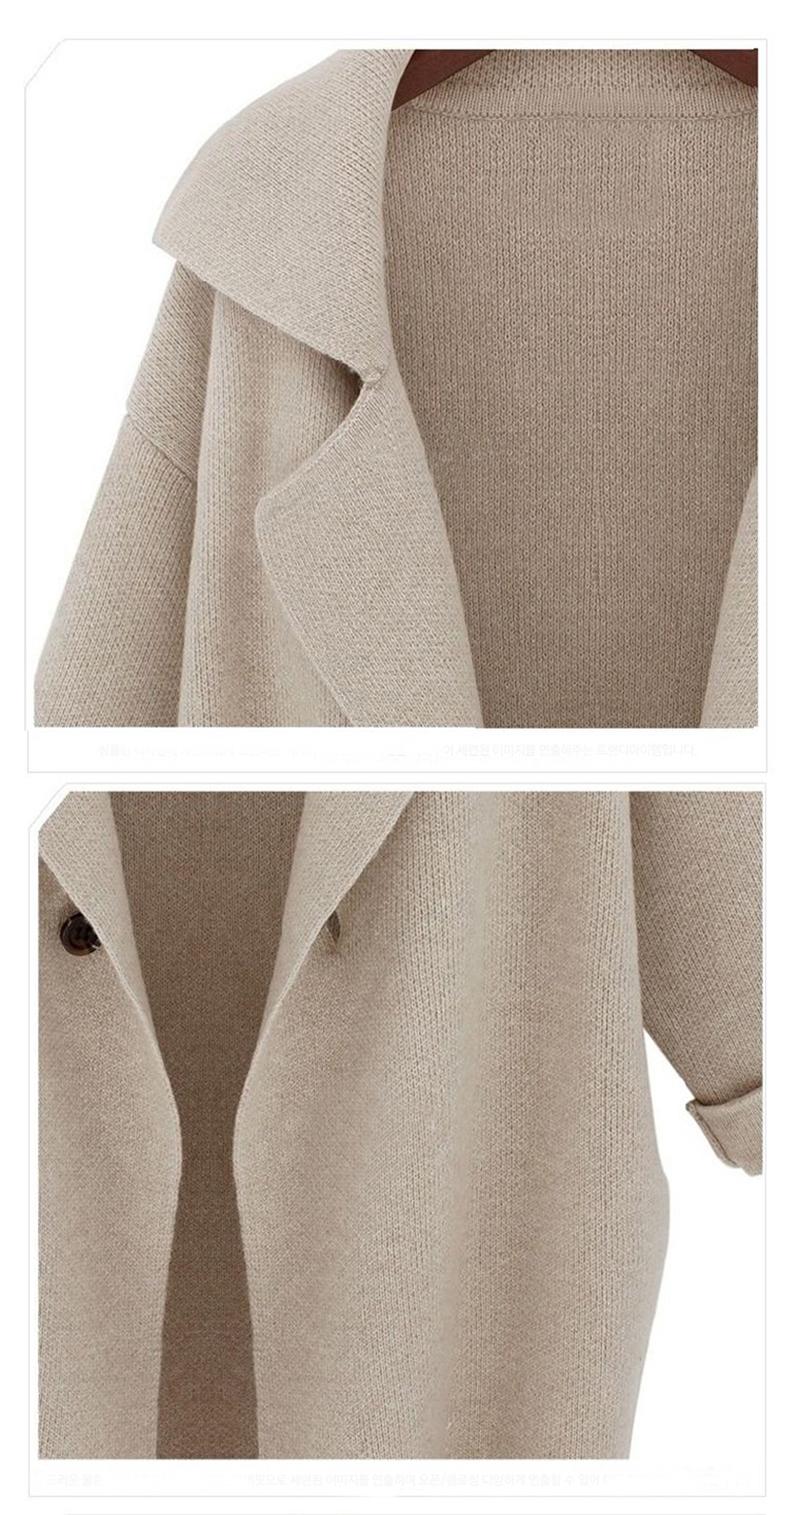 2016-New-Womens-Winter-Jackets-And-Coats-Plus-Size-Turn-Down-Collor-Coat-Shawl-Collar-Cardigan-Coat--32702655232